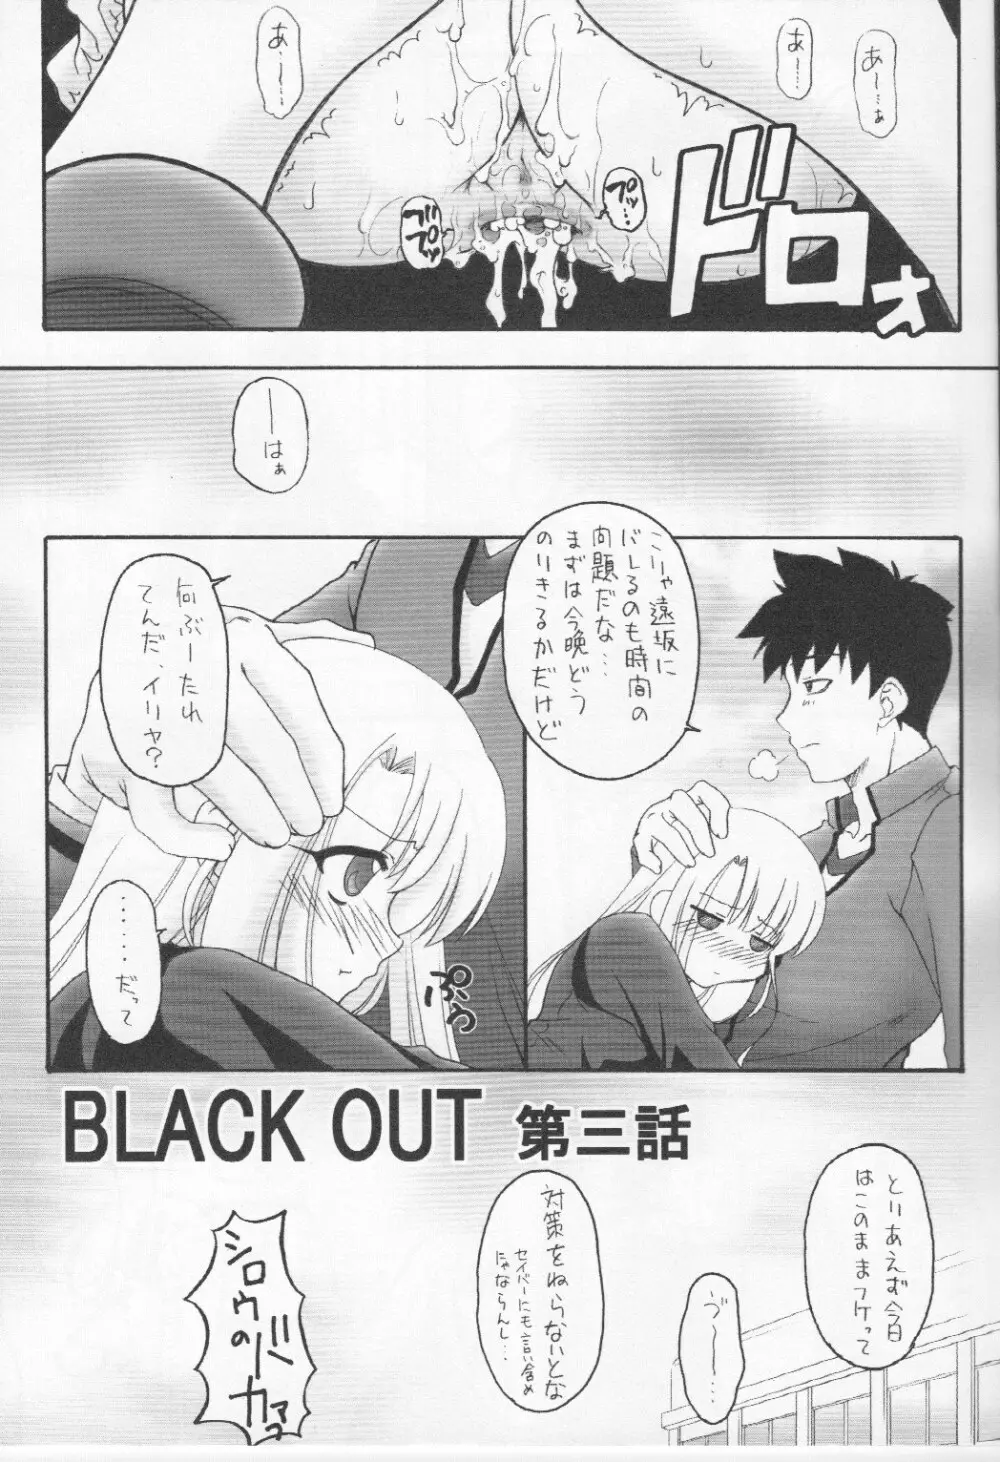 Fake black out SIDE-C - page9